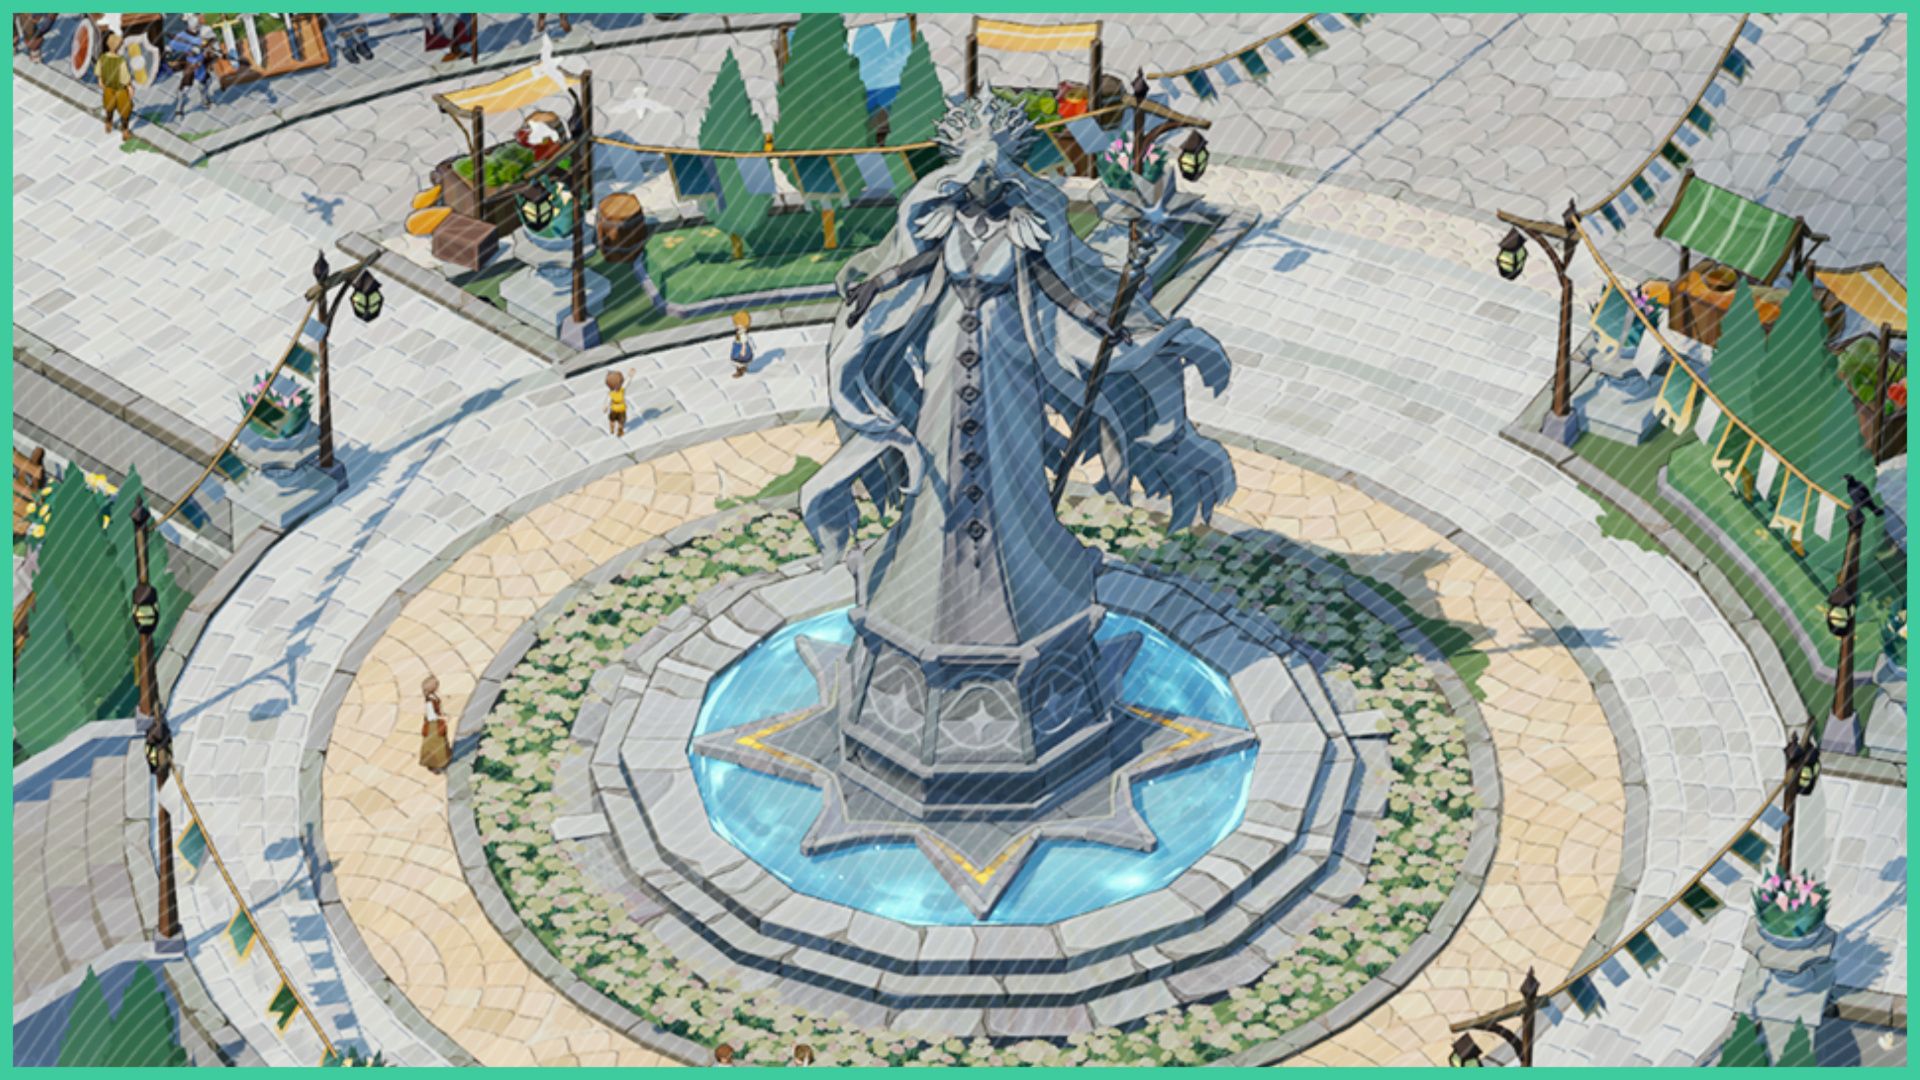 feature image for our afk journey best teams guide, the image is a screenshot of the center of holistone from the game, of the large stone statue of a woman surrounded by the water in the fountain, there are product stalls and trees circling the stone pavement as well as residents going about their day